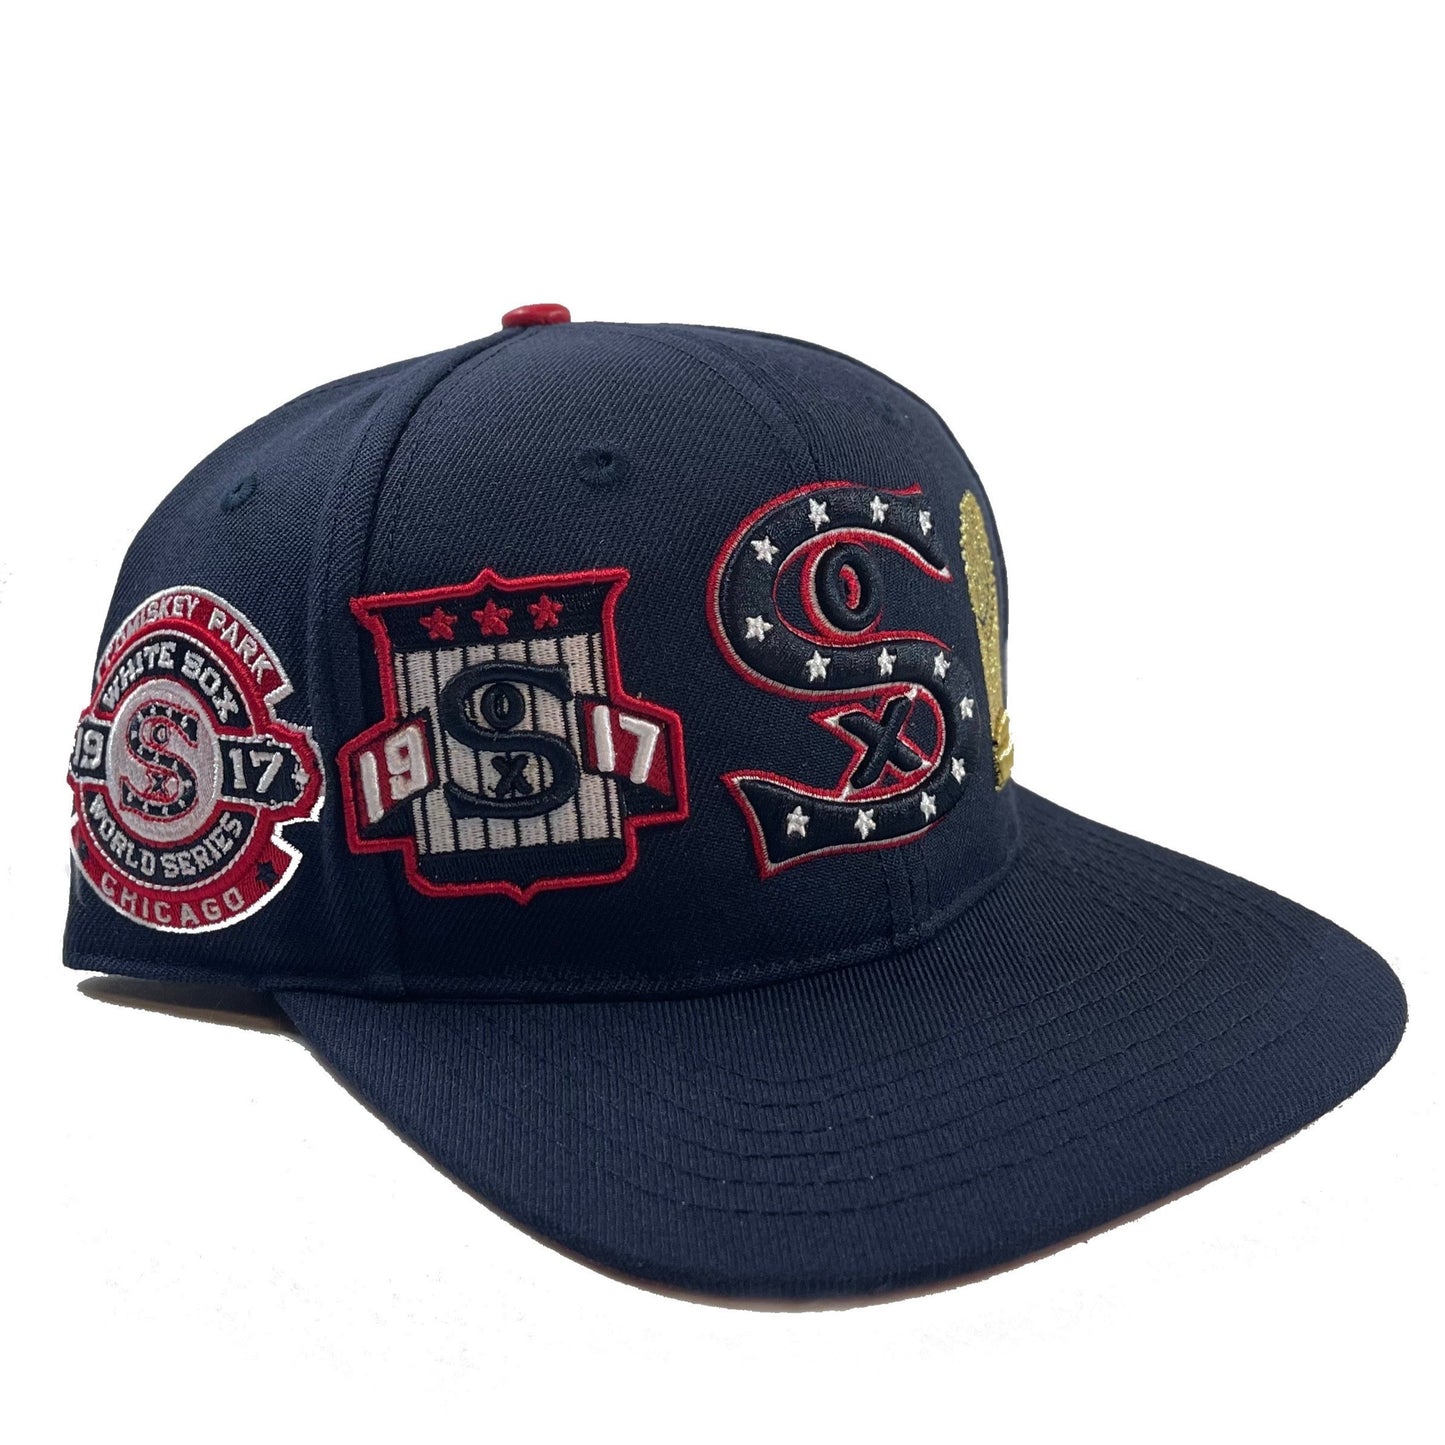 Chicago White Sox Patches (Navy) Snapback